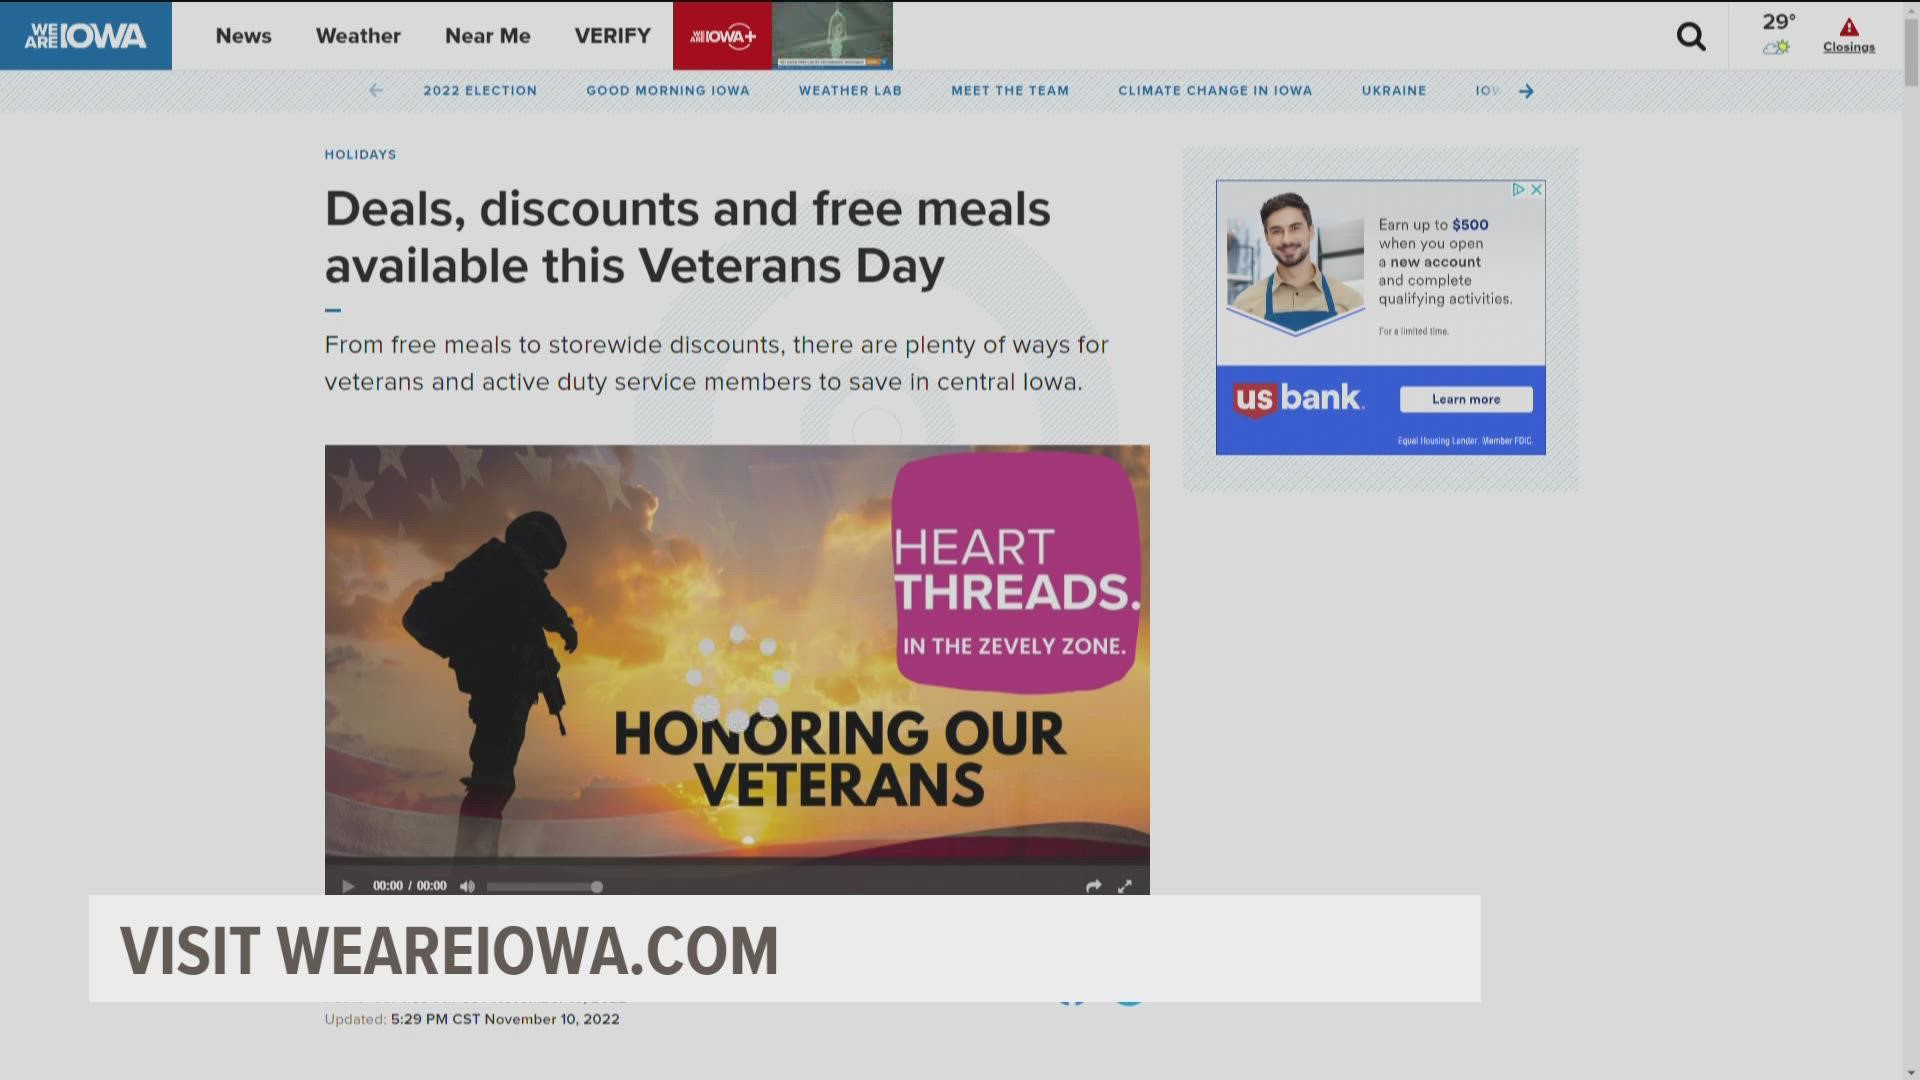 From free meals to storewide discounts, there are plenty of ways for veterans and active duty service members to save in central Iowa.